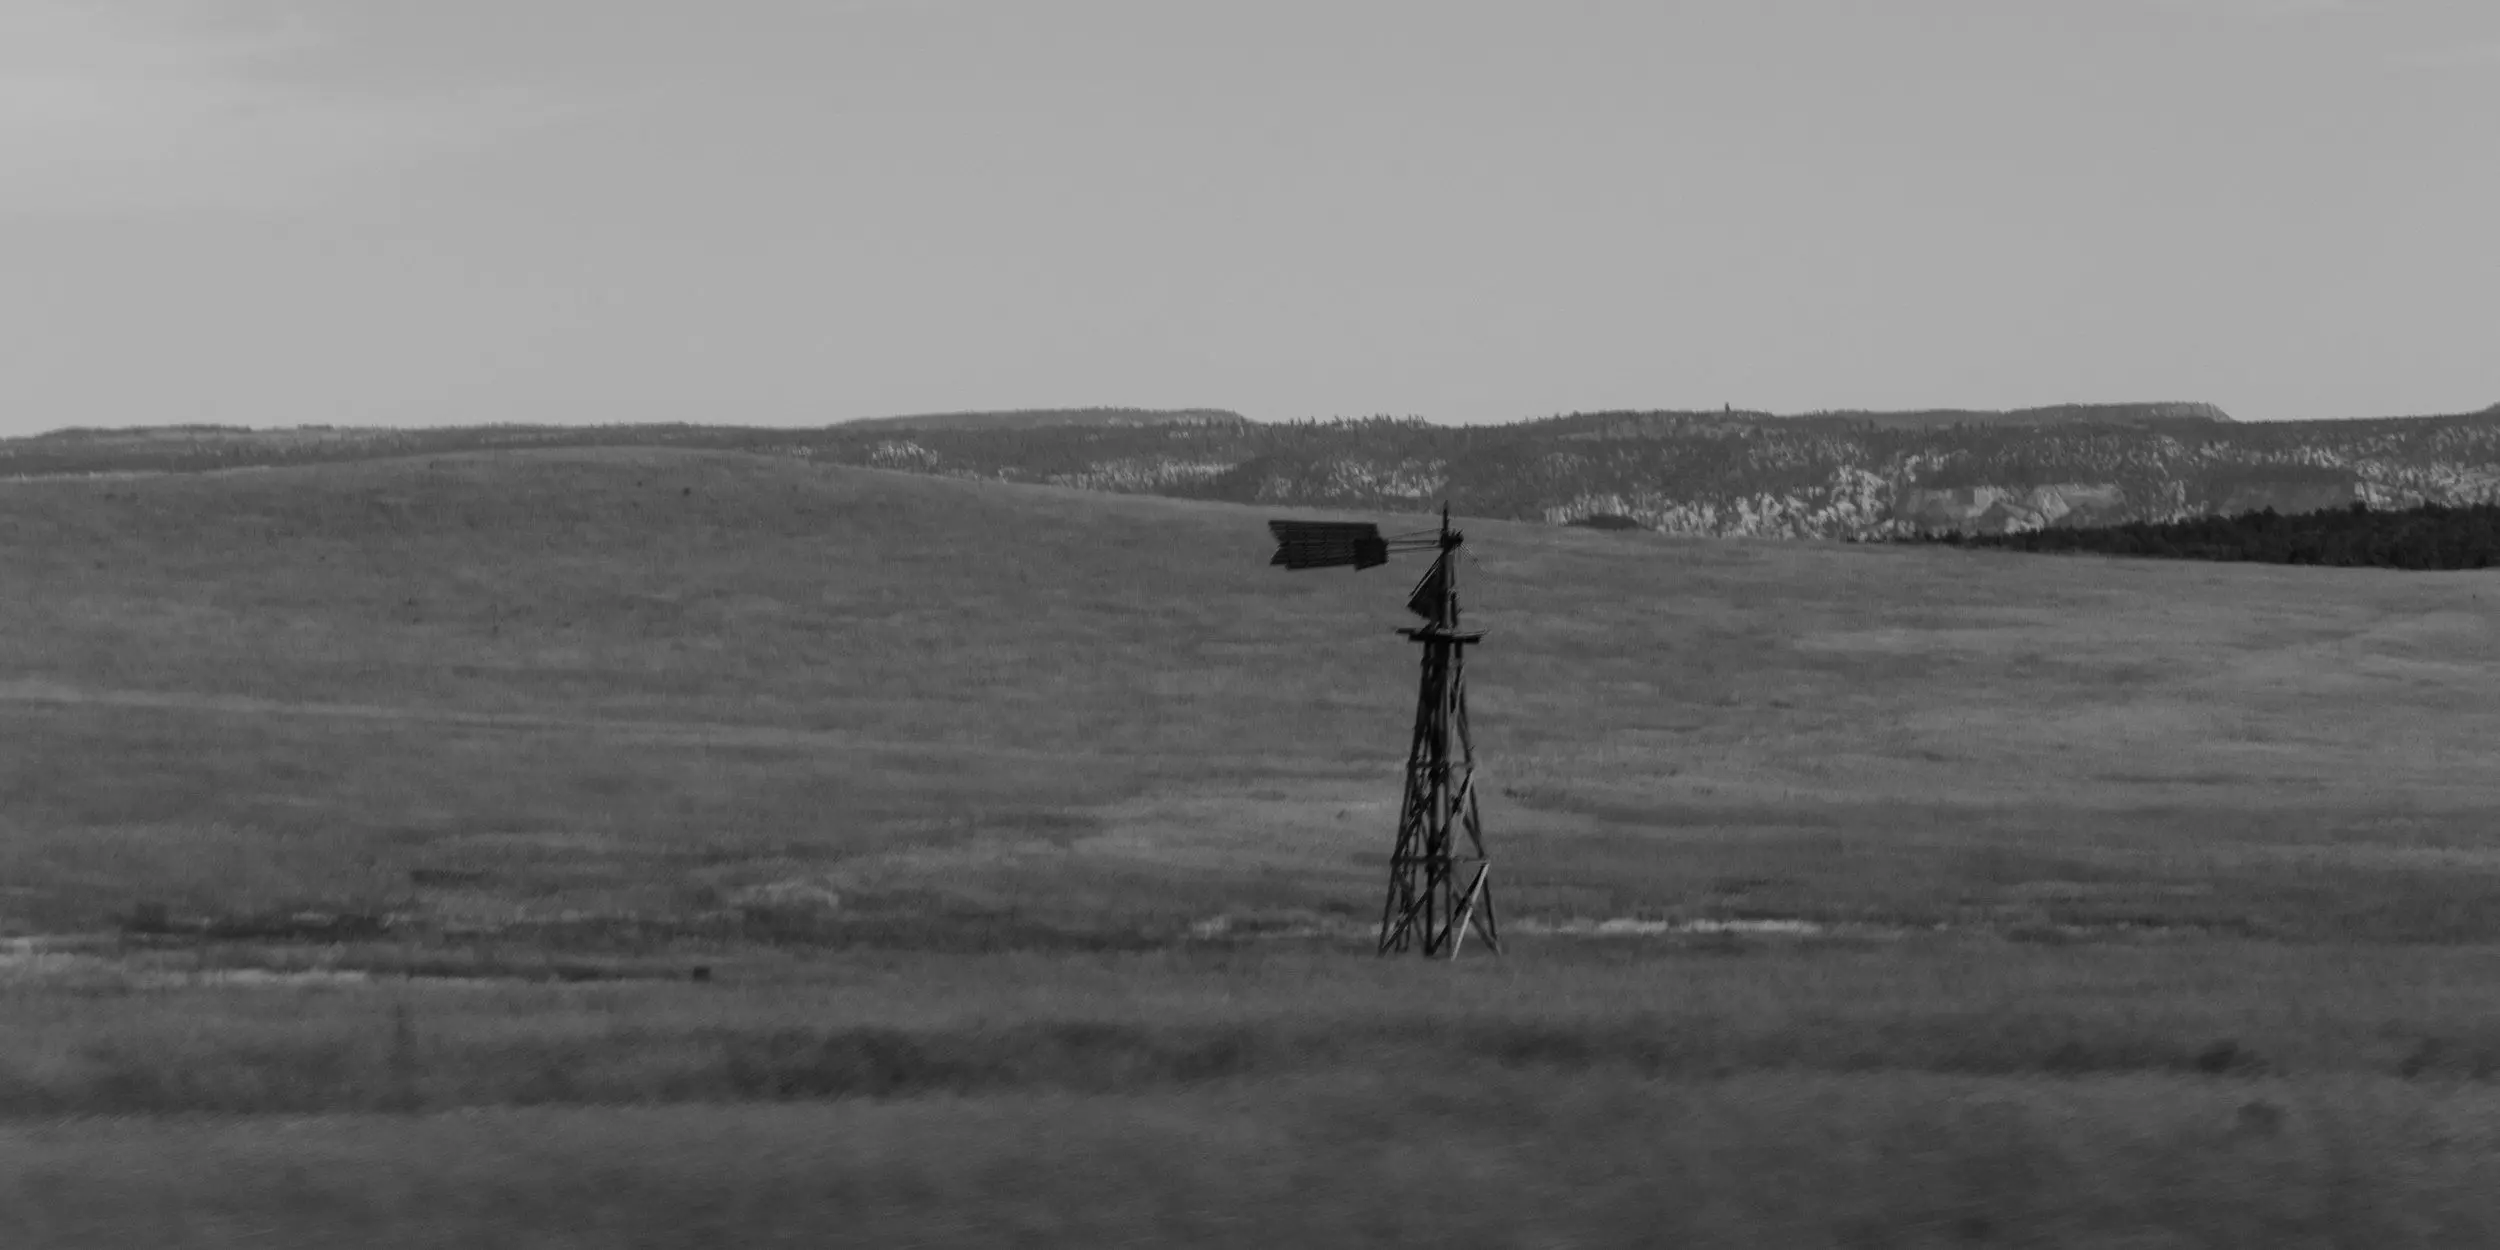 A lone, broken windmill stands in an empty field. Black and white.